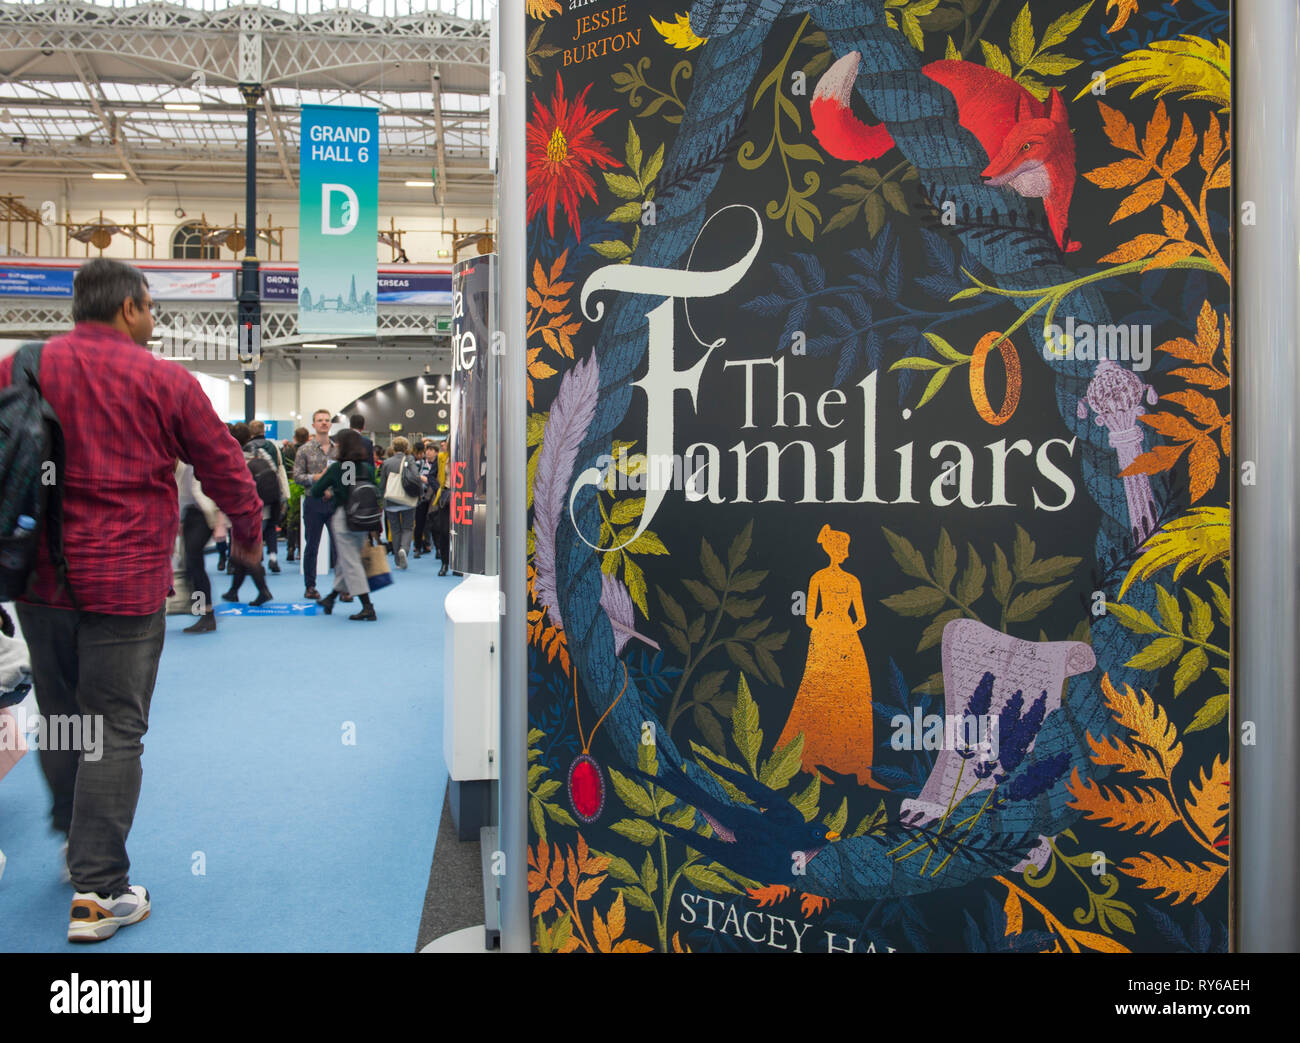 Olympia, London, UK. 12 March, 2019.  The annual London Book Fair celebrates its 48th anniversary with an estimated 25,000 publishing professionals due to visit over the busy 3 day event. Credit: Malcolm Park/Alamy Live News. Stock Photo